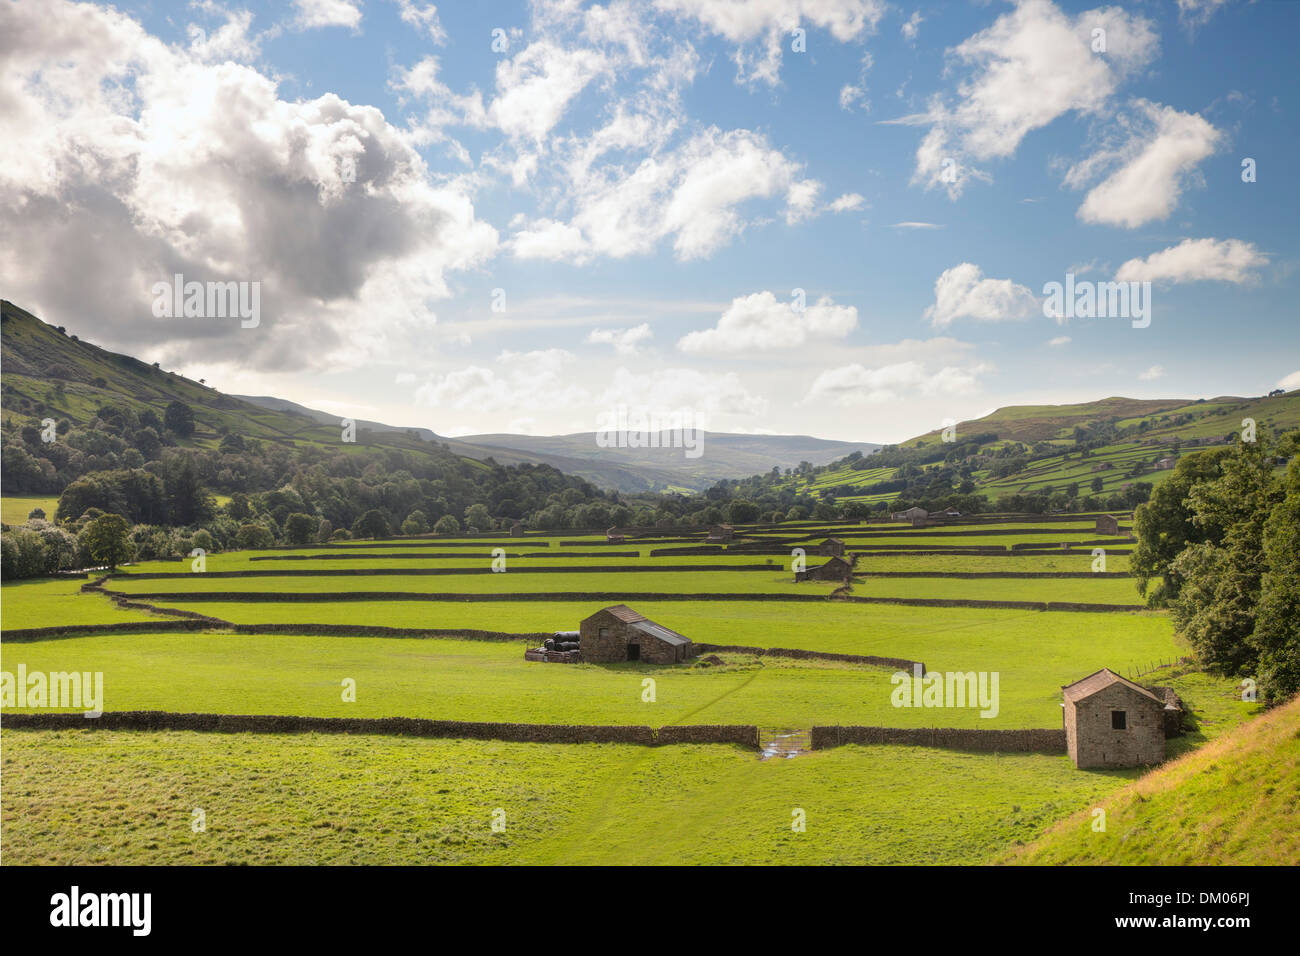 Field barns at Gunnerside, Swaledale, Yorkshire Dales National Park, England. Stock Photo